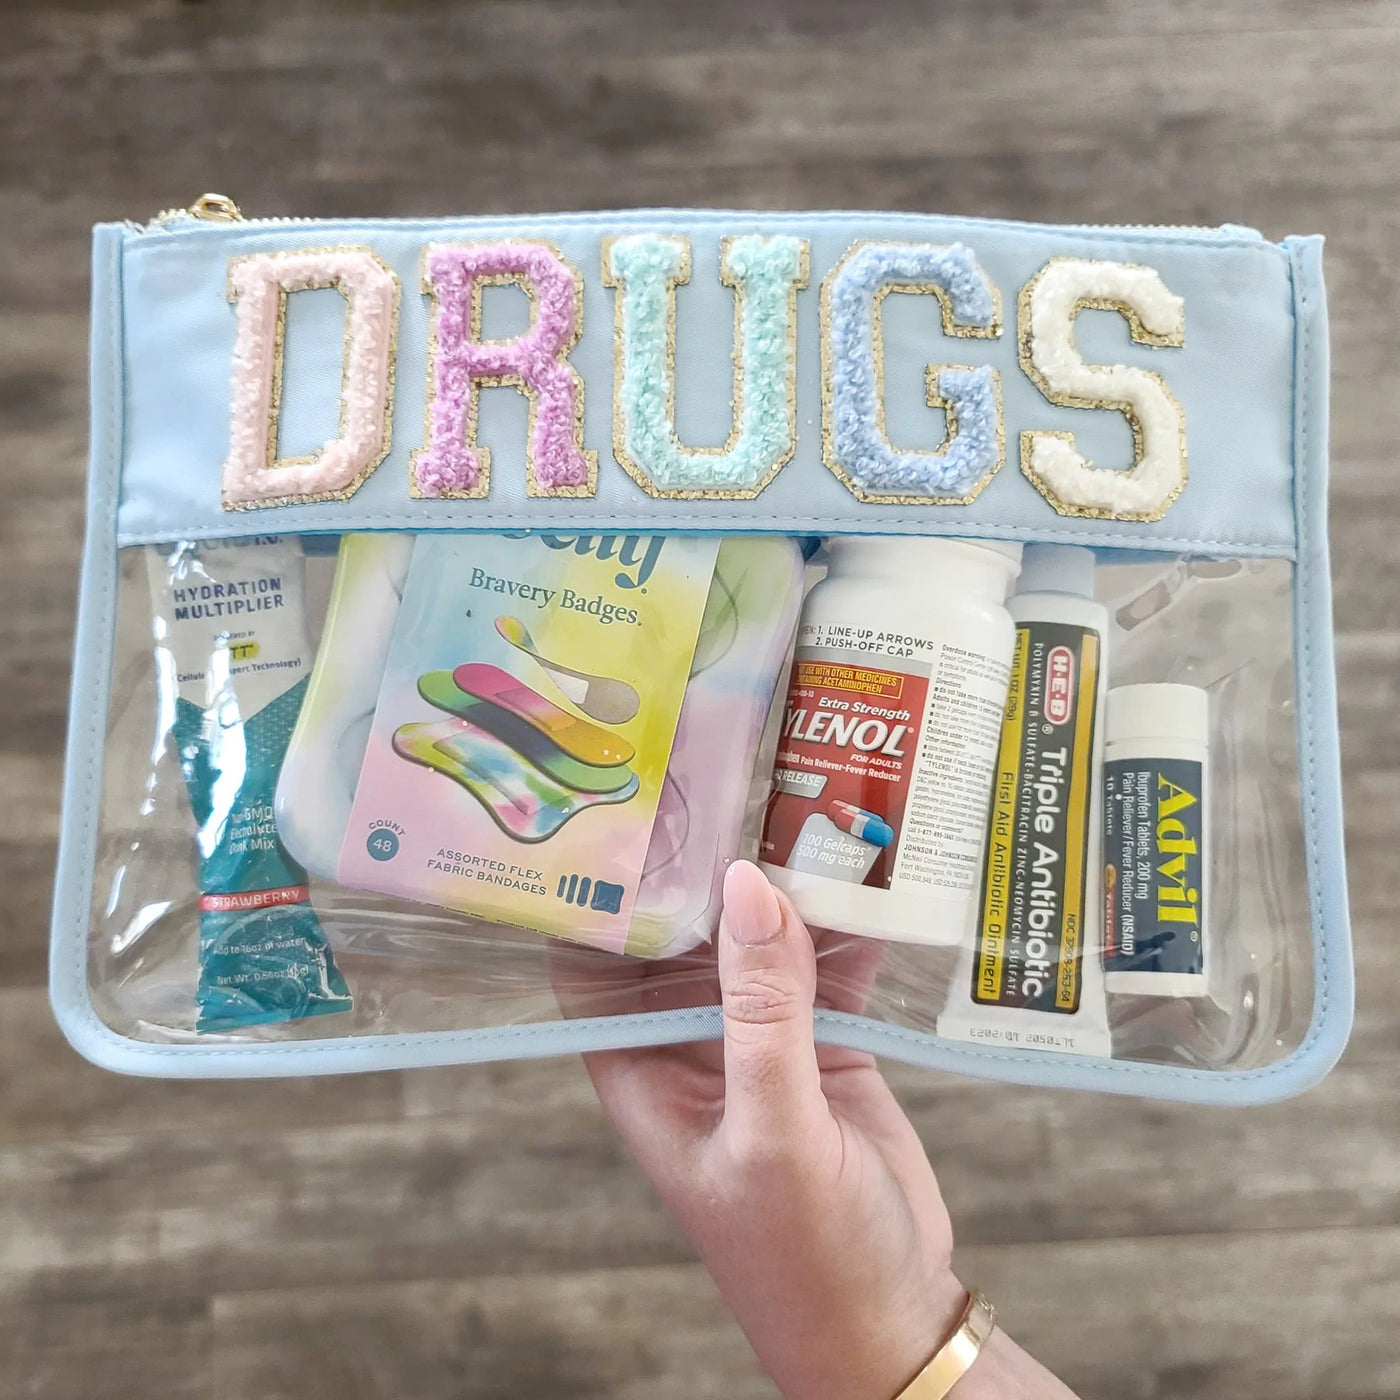 Drugs Clear Baby Blue Bag